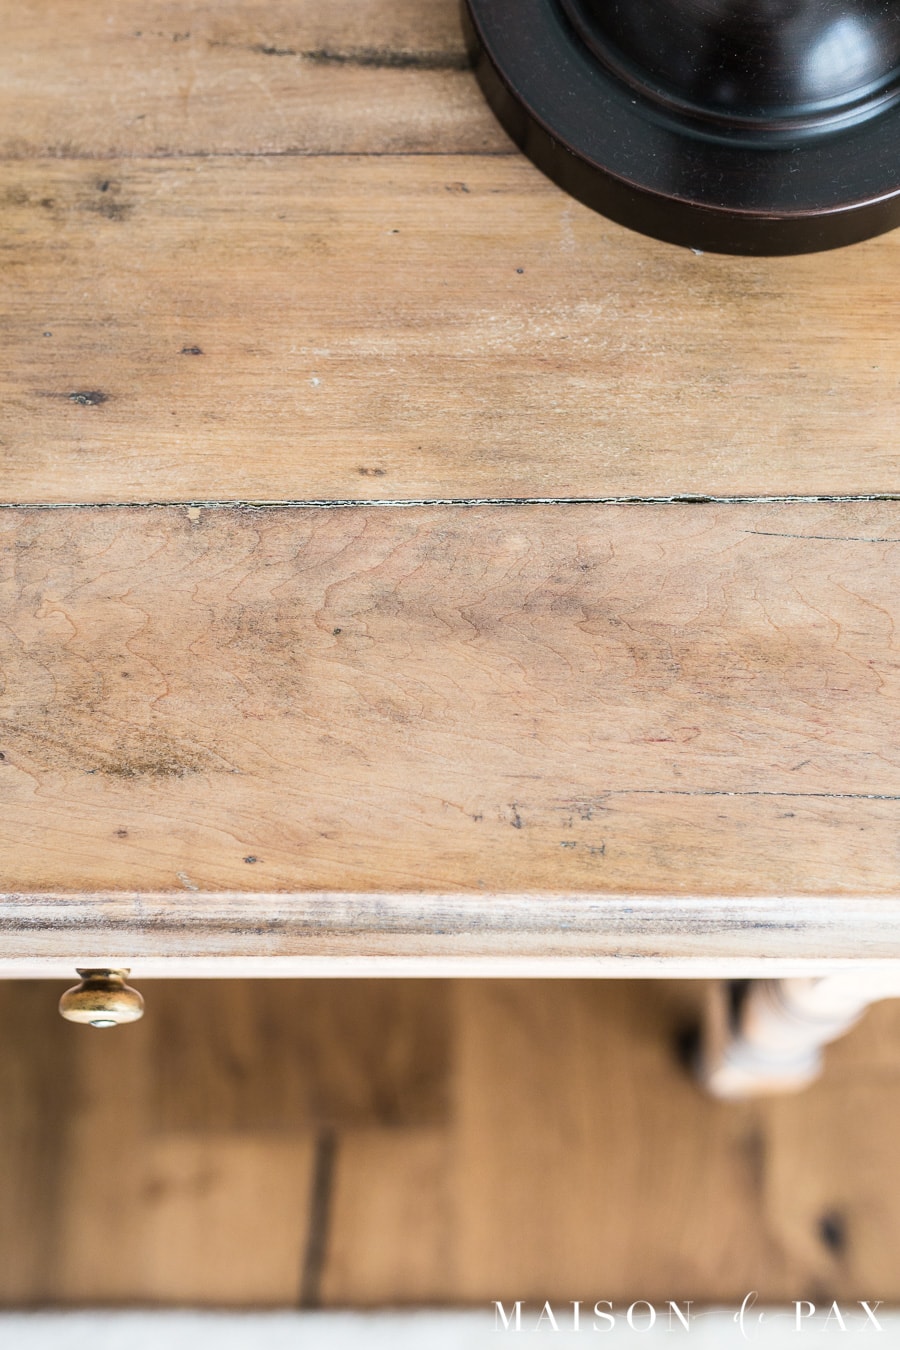 Natural wood look: find out how to seal your wood and yet retain that raw wood look when refinishing vintage furniture #diyfurniture #furnituremakeover #diyproject #rawwood #rusticmodern #naturalwood 